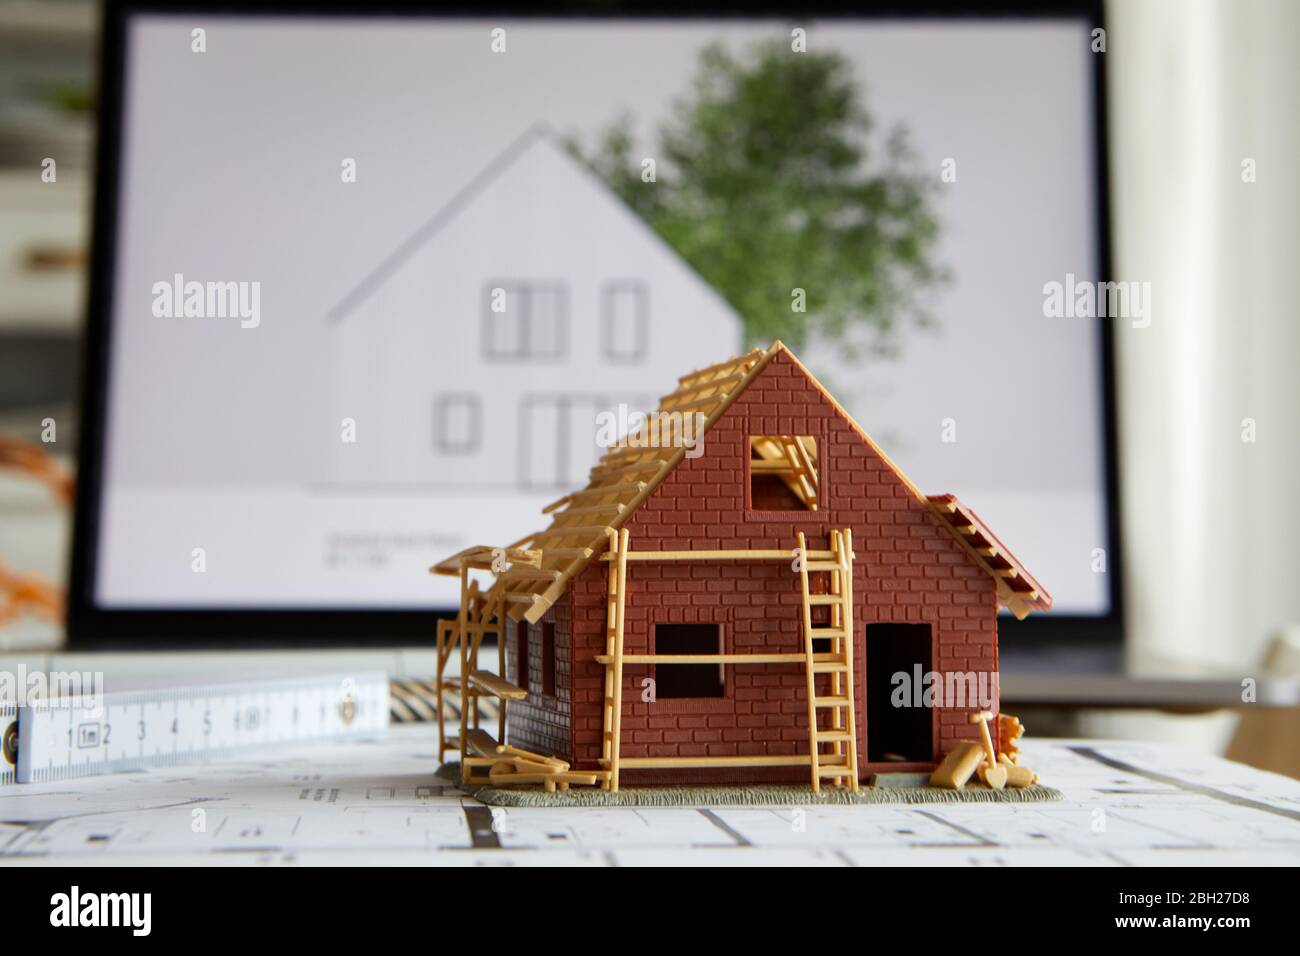 Architecture, model of home ownership on construction plan, laptop in the background Stock Photo